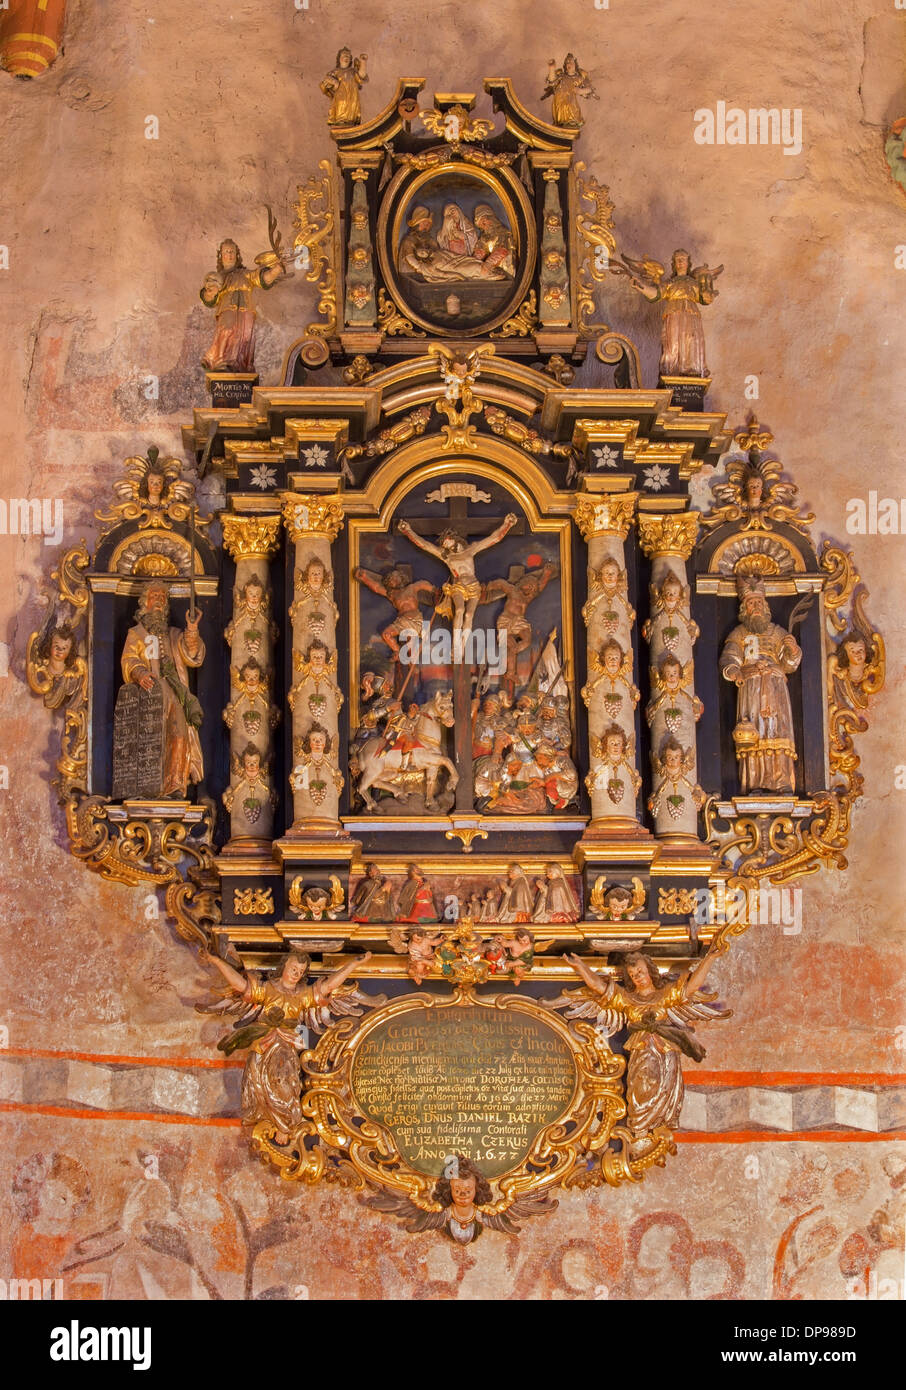 Renaissance-baroque epitaph from presbytery of gothic evangelical church in Stitnik with the crucifixioin motive Stock Photo